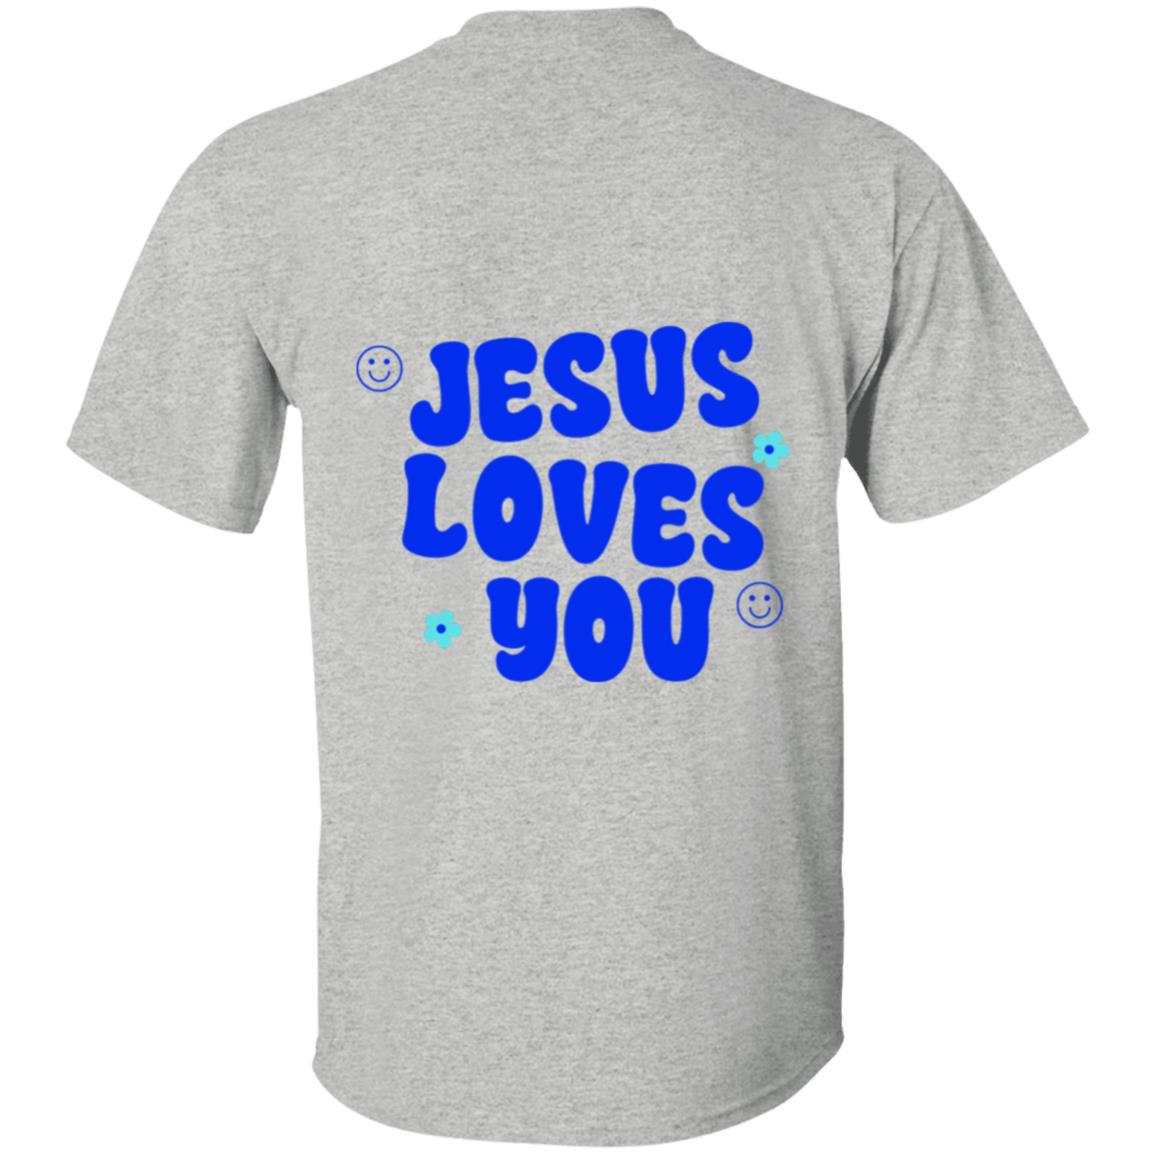 Get trendy with Jesus loves you Jesus Loves you  T-Shirt - T-Shirts available at Good Gift Company. Grab yours for $18.95 today!